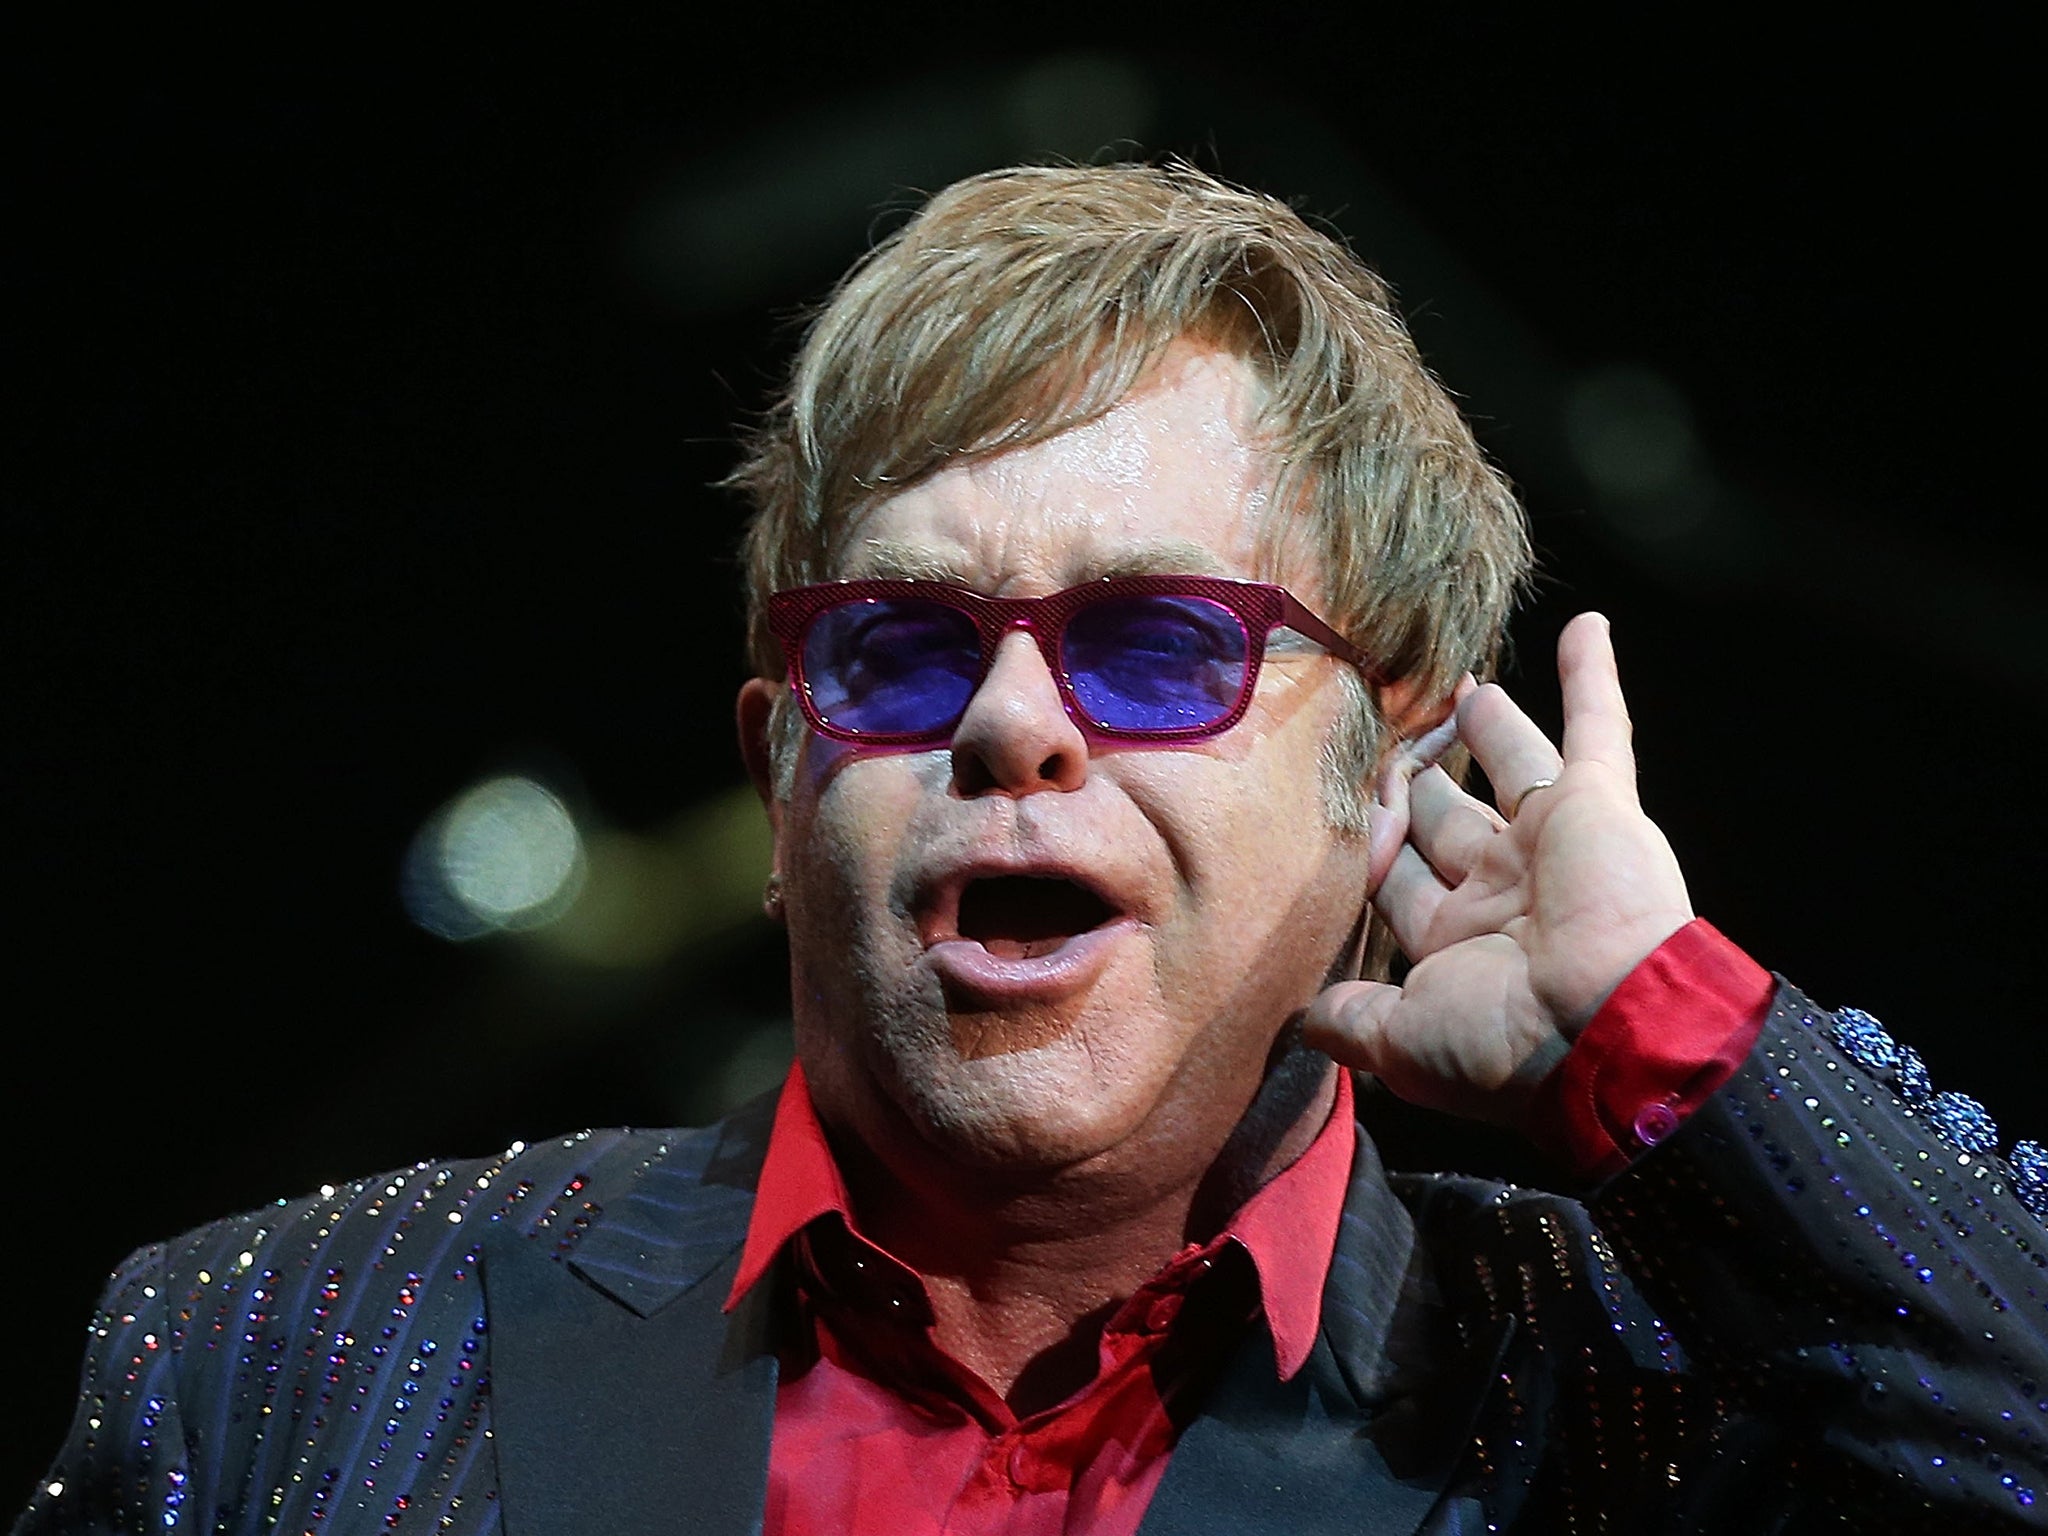 Sir Elton used his Instagram page to hail 'support' of Ukrainian president Petro Poroshenko after meeting him in Kiev